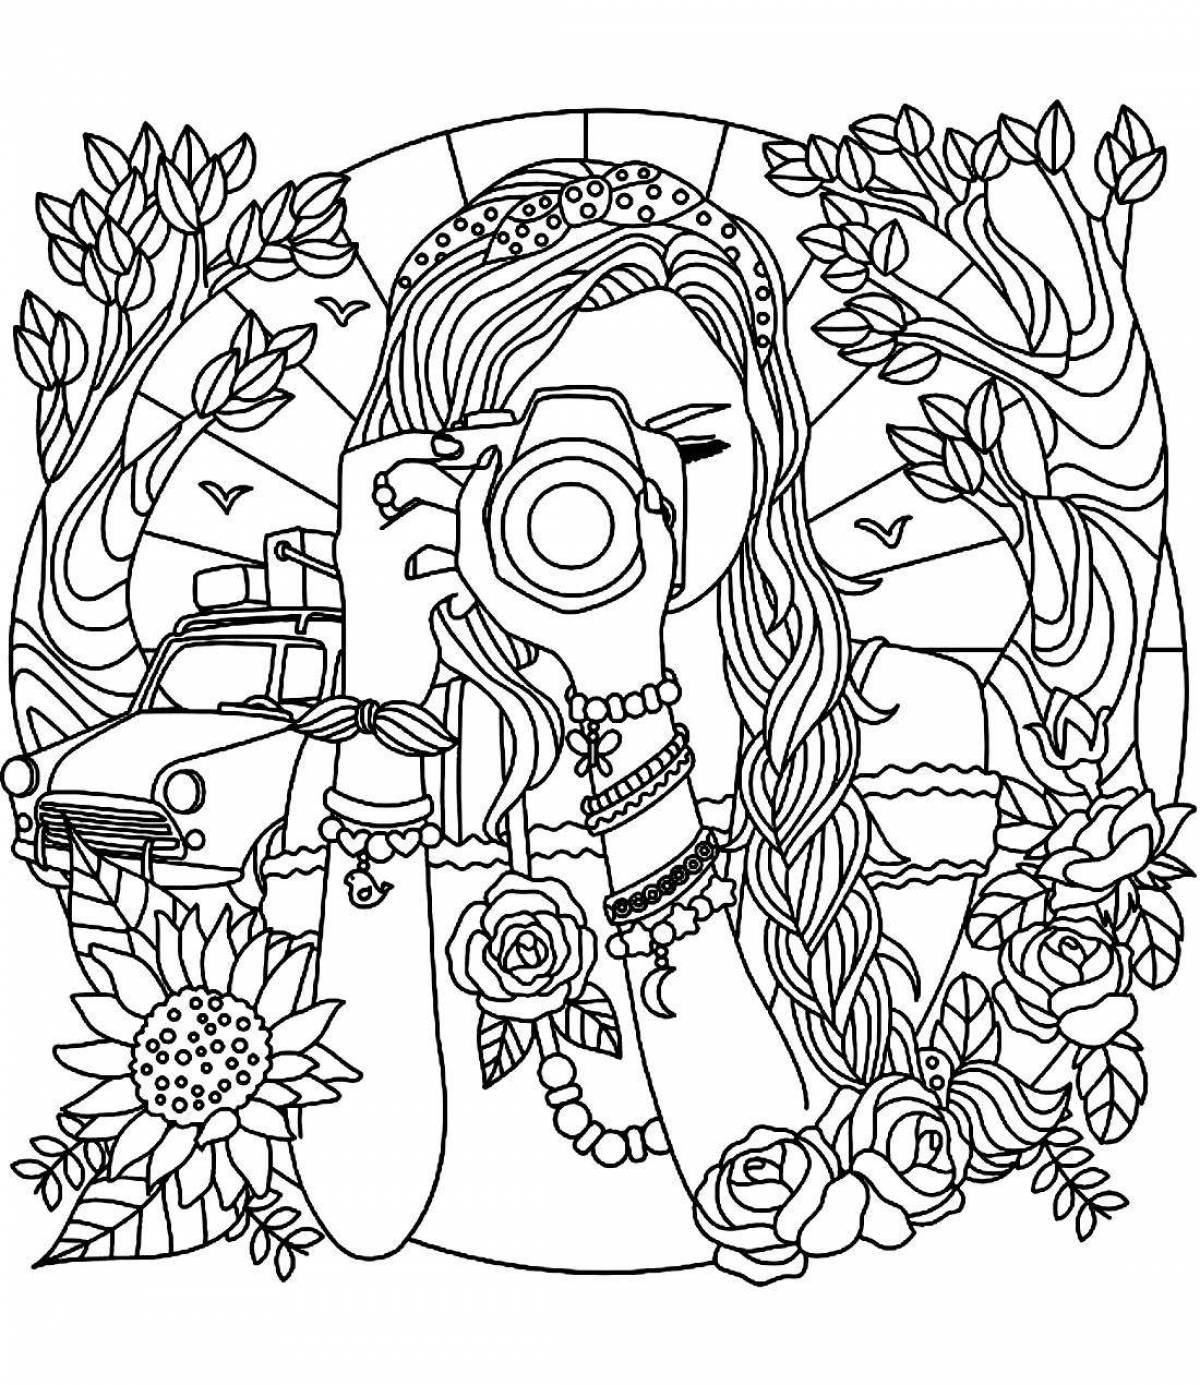 Color-frenzy coloring page for 14 year old girls